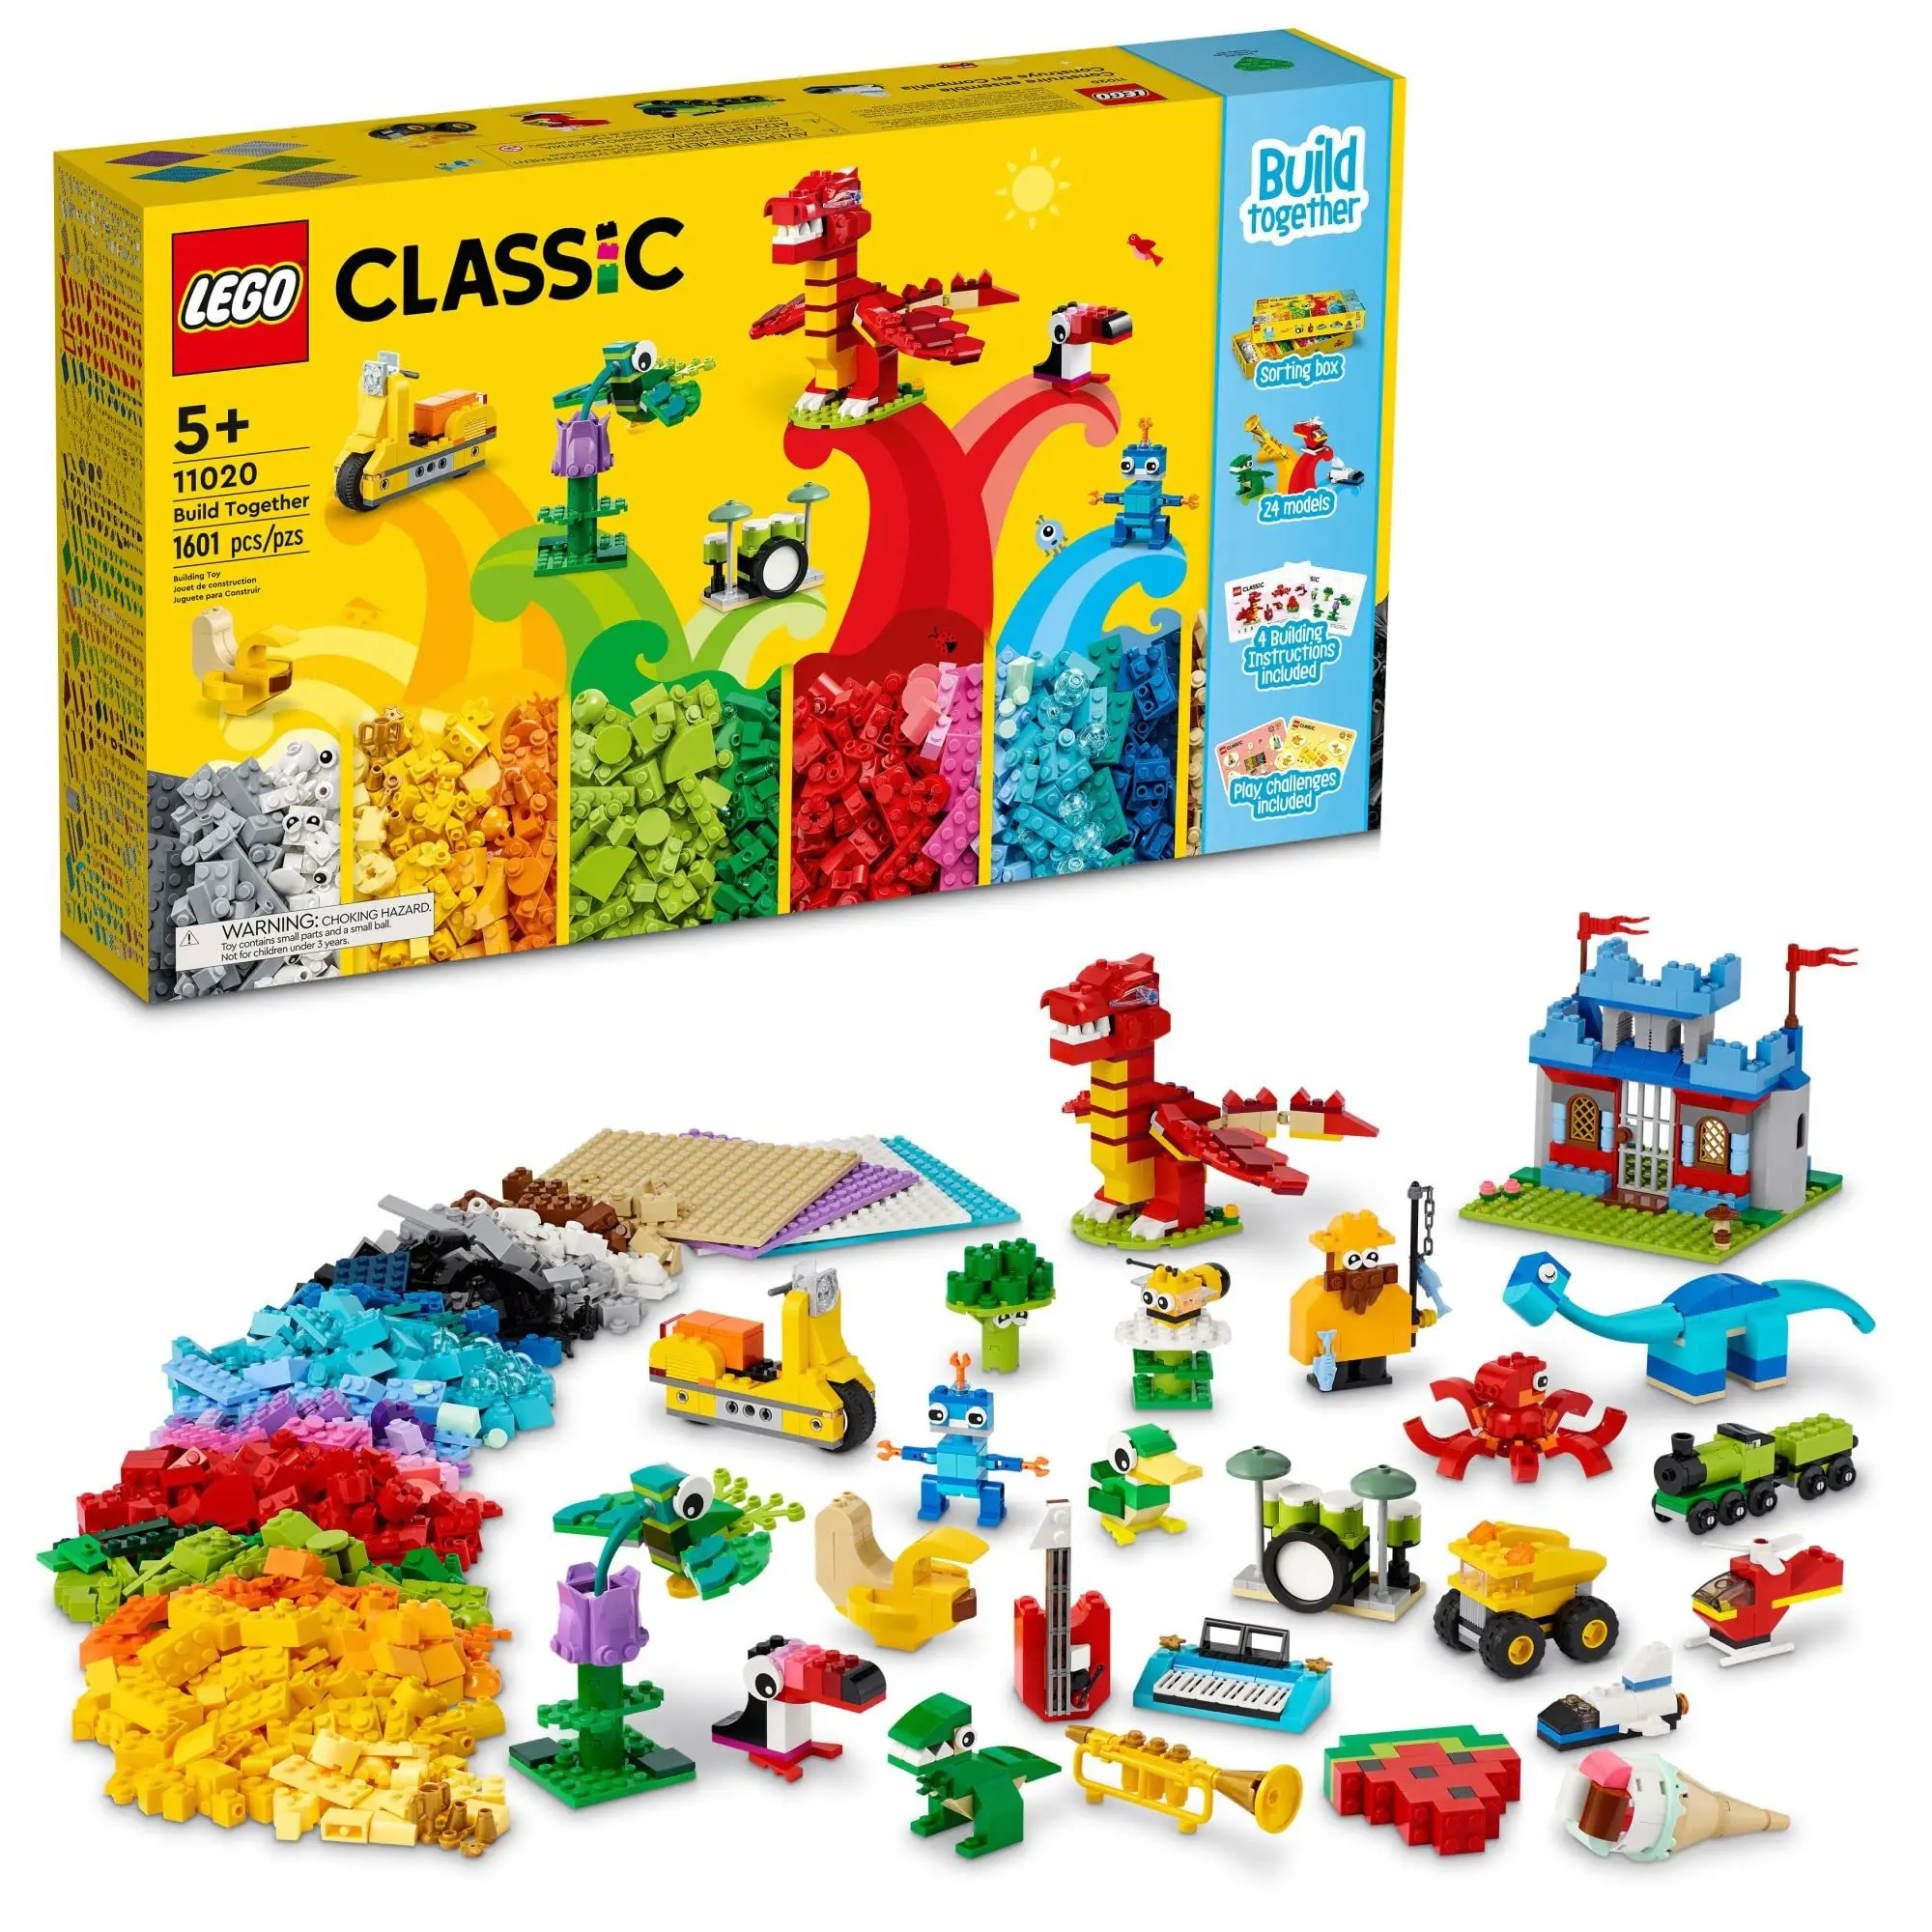 

LEGO Classic Build Together 11020 Creative Building Toy Set for Kids, Girls, and Boys Ages 5+ Birthday Gift (1,601 Pieces)